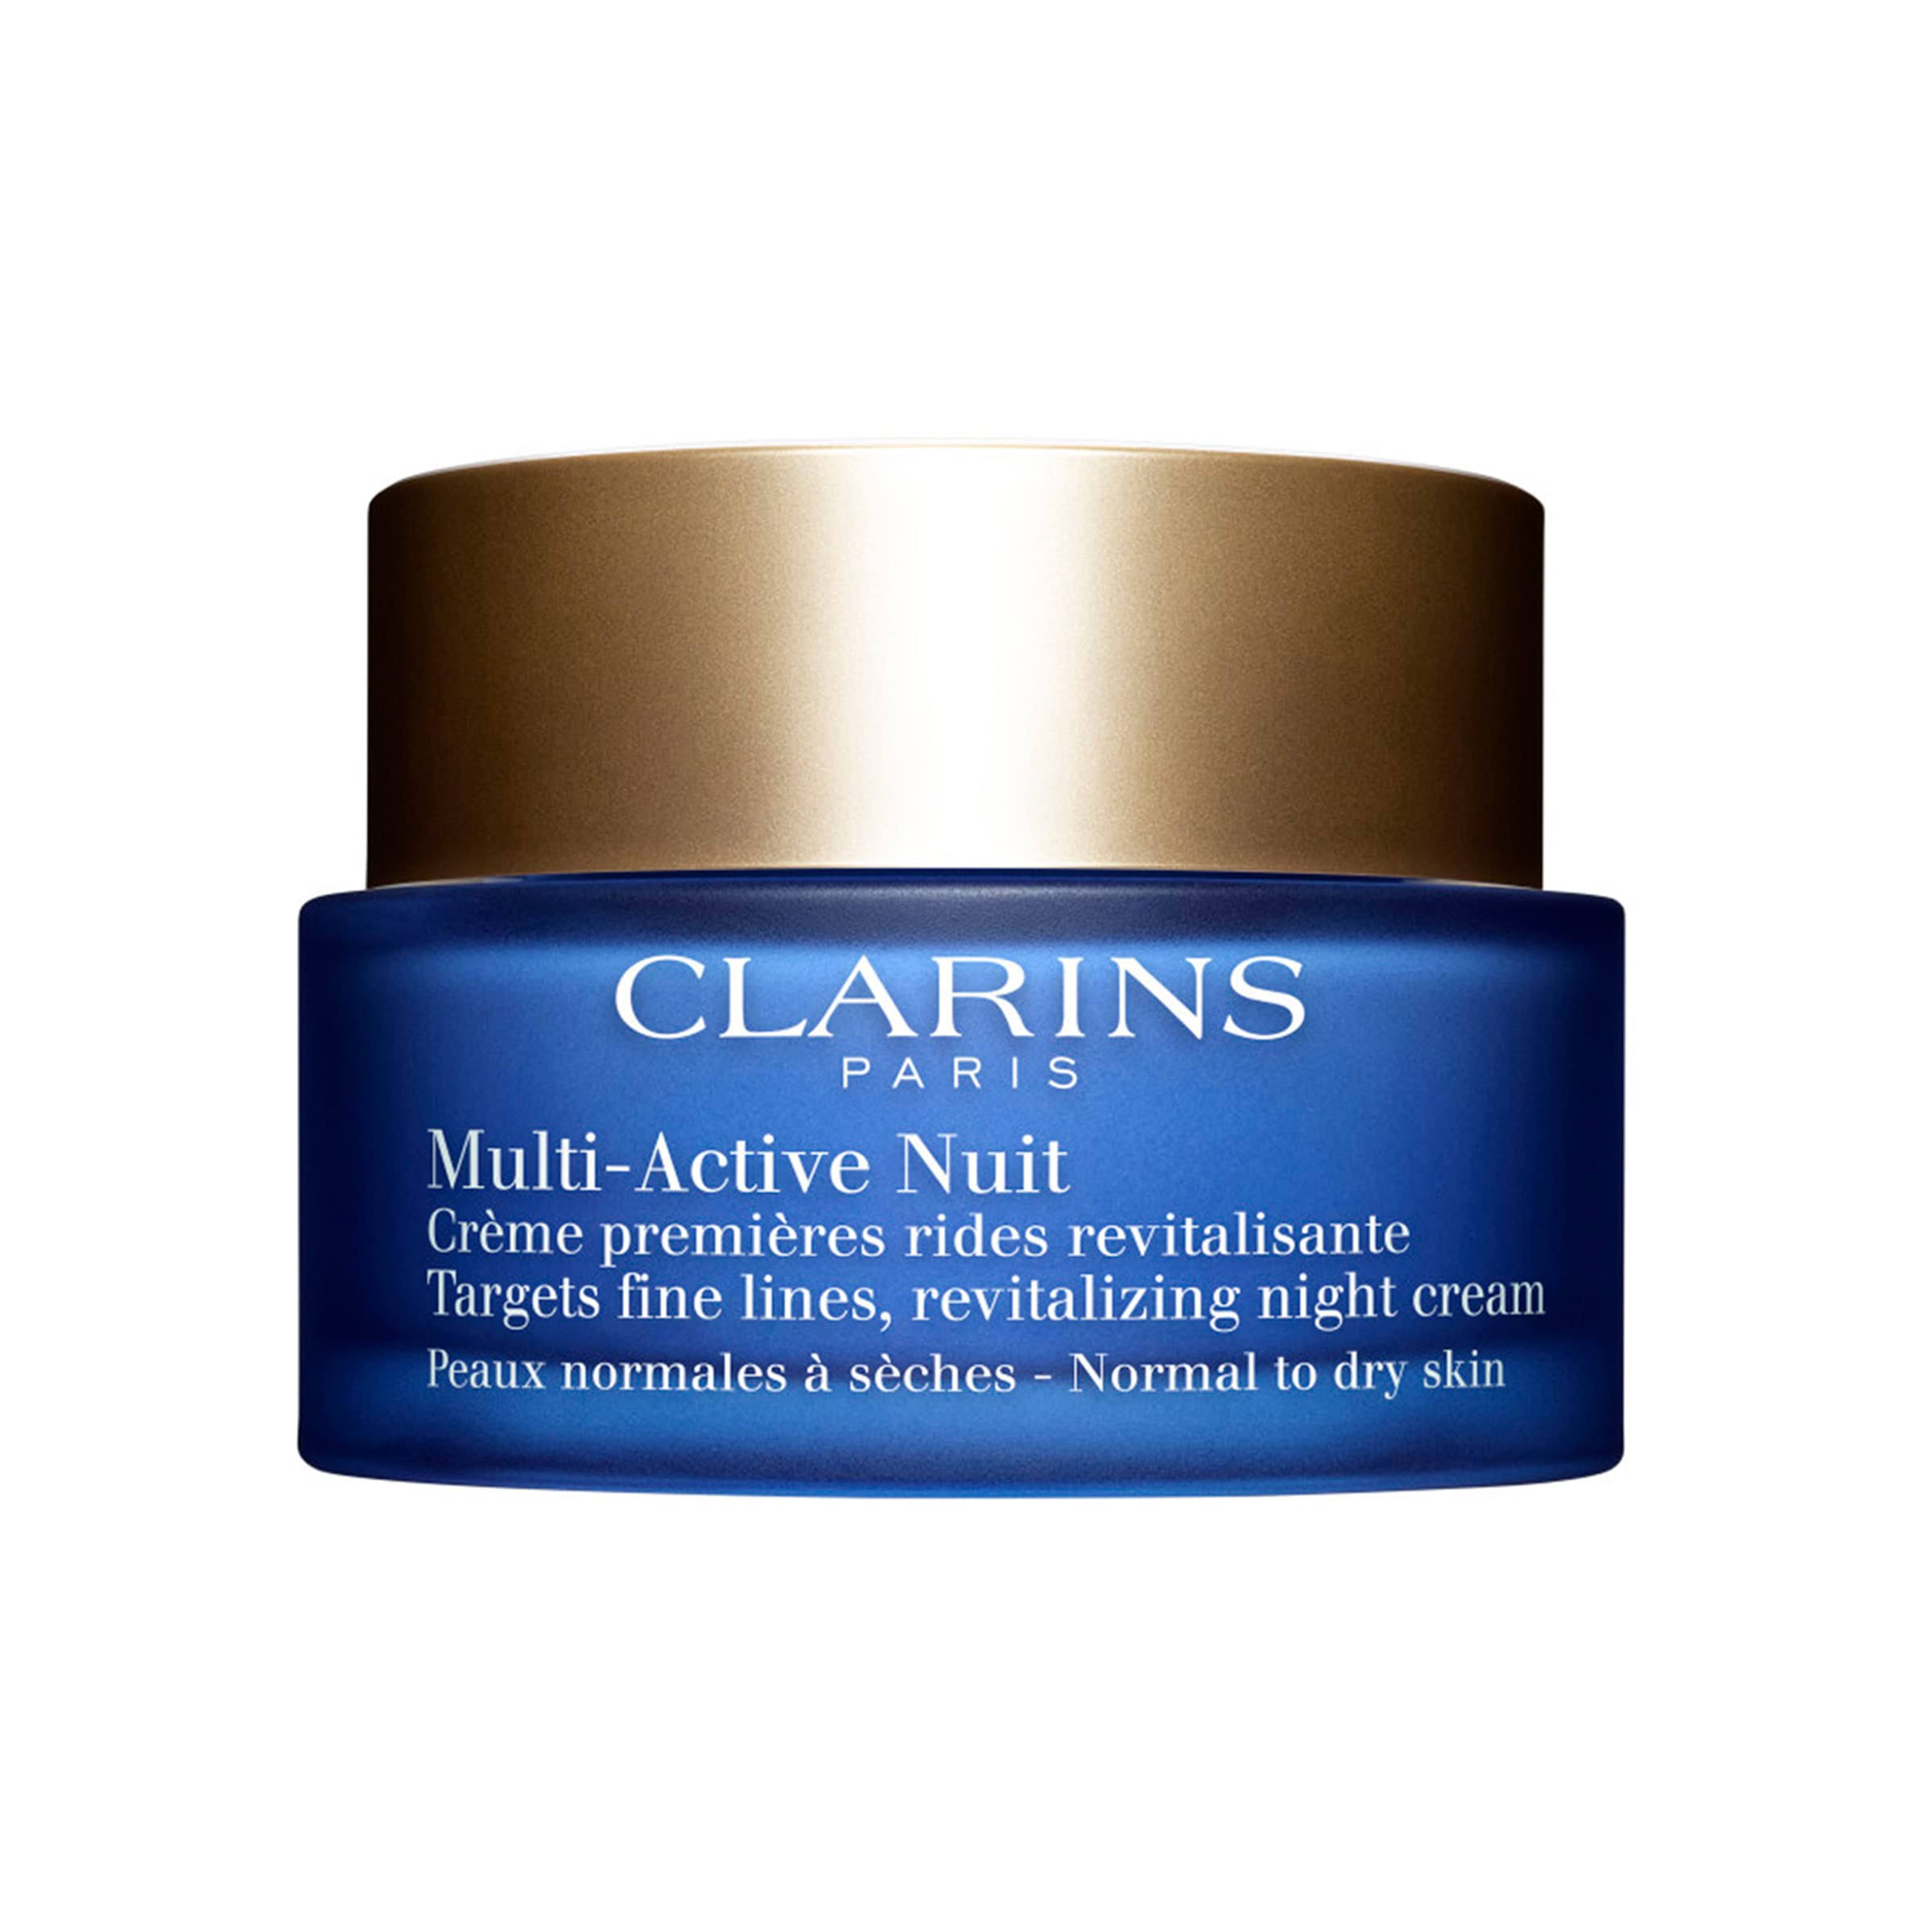 Clarins Multi-Active Night Cream - Normal to Dry Skin 1.7 oz.